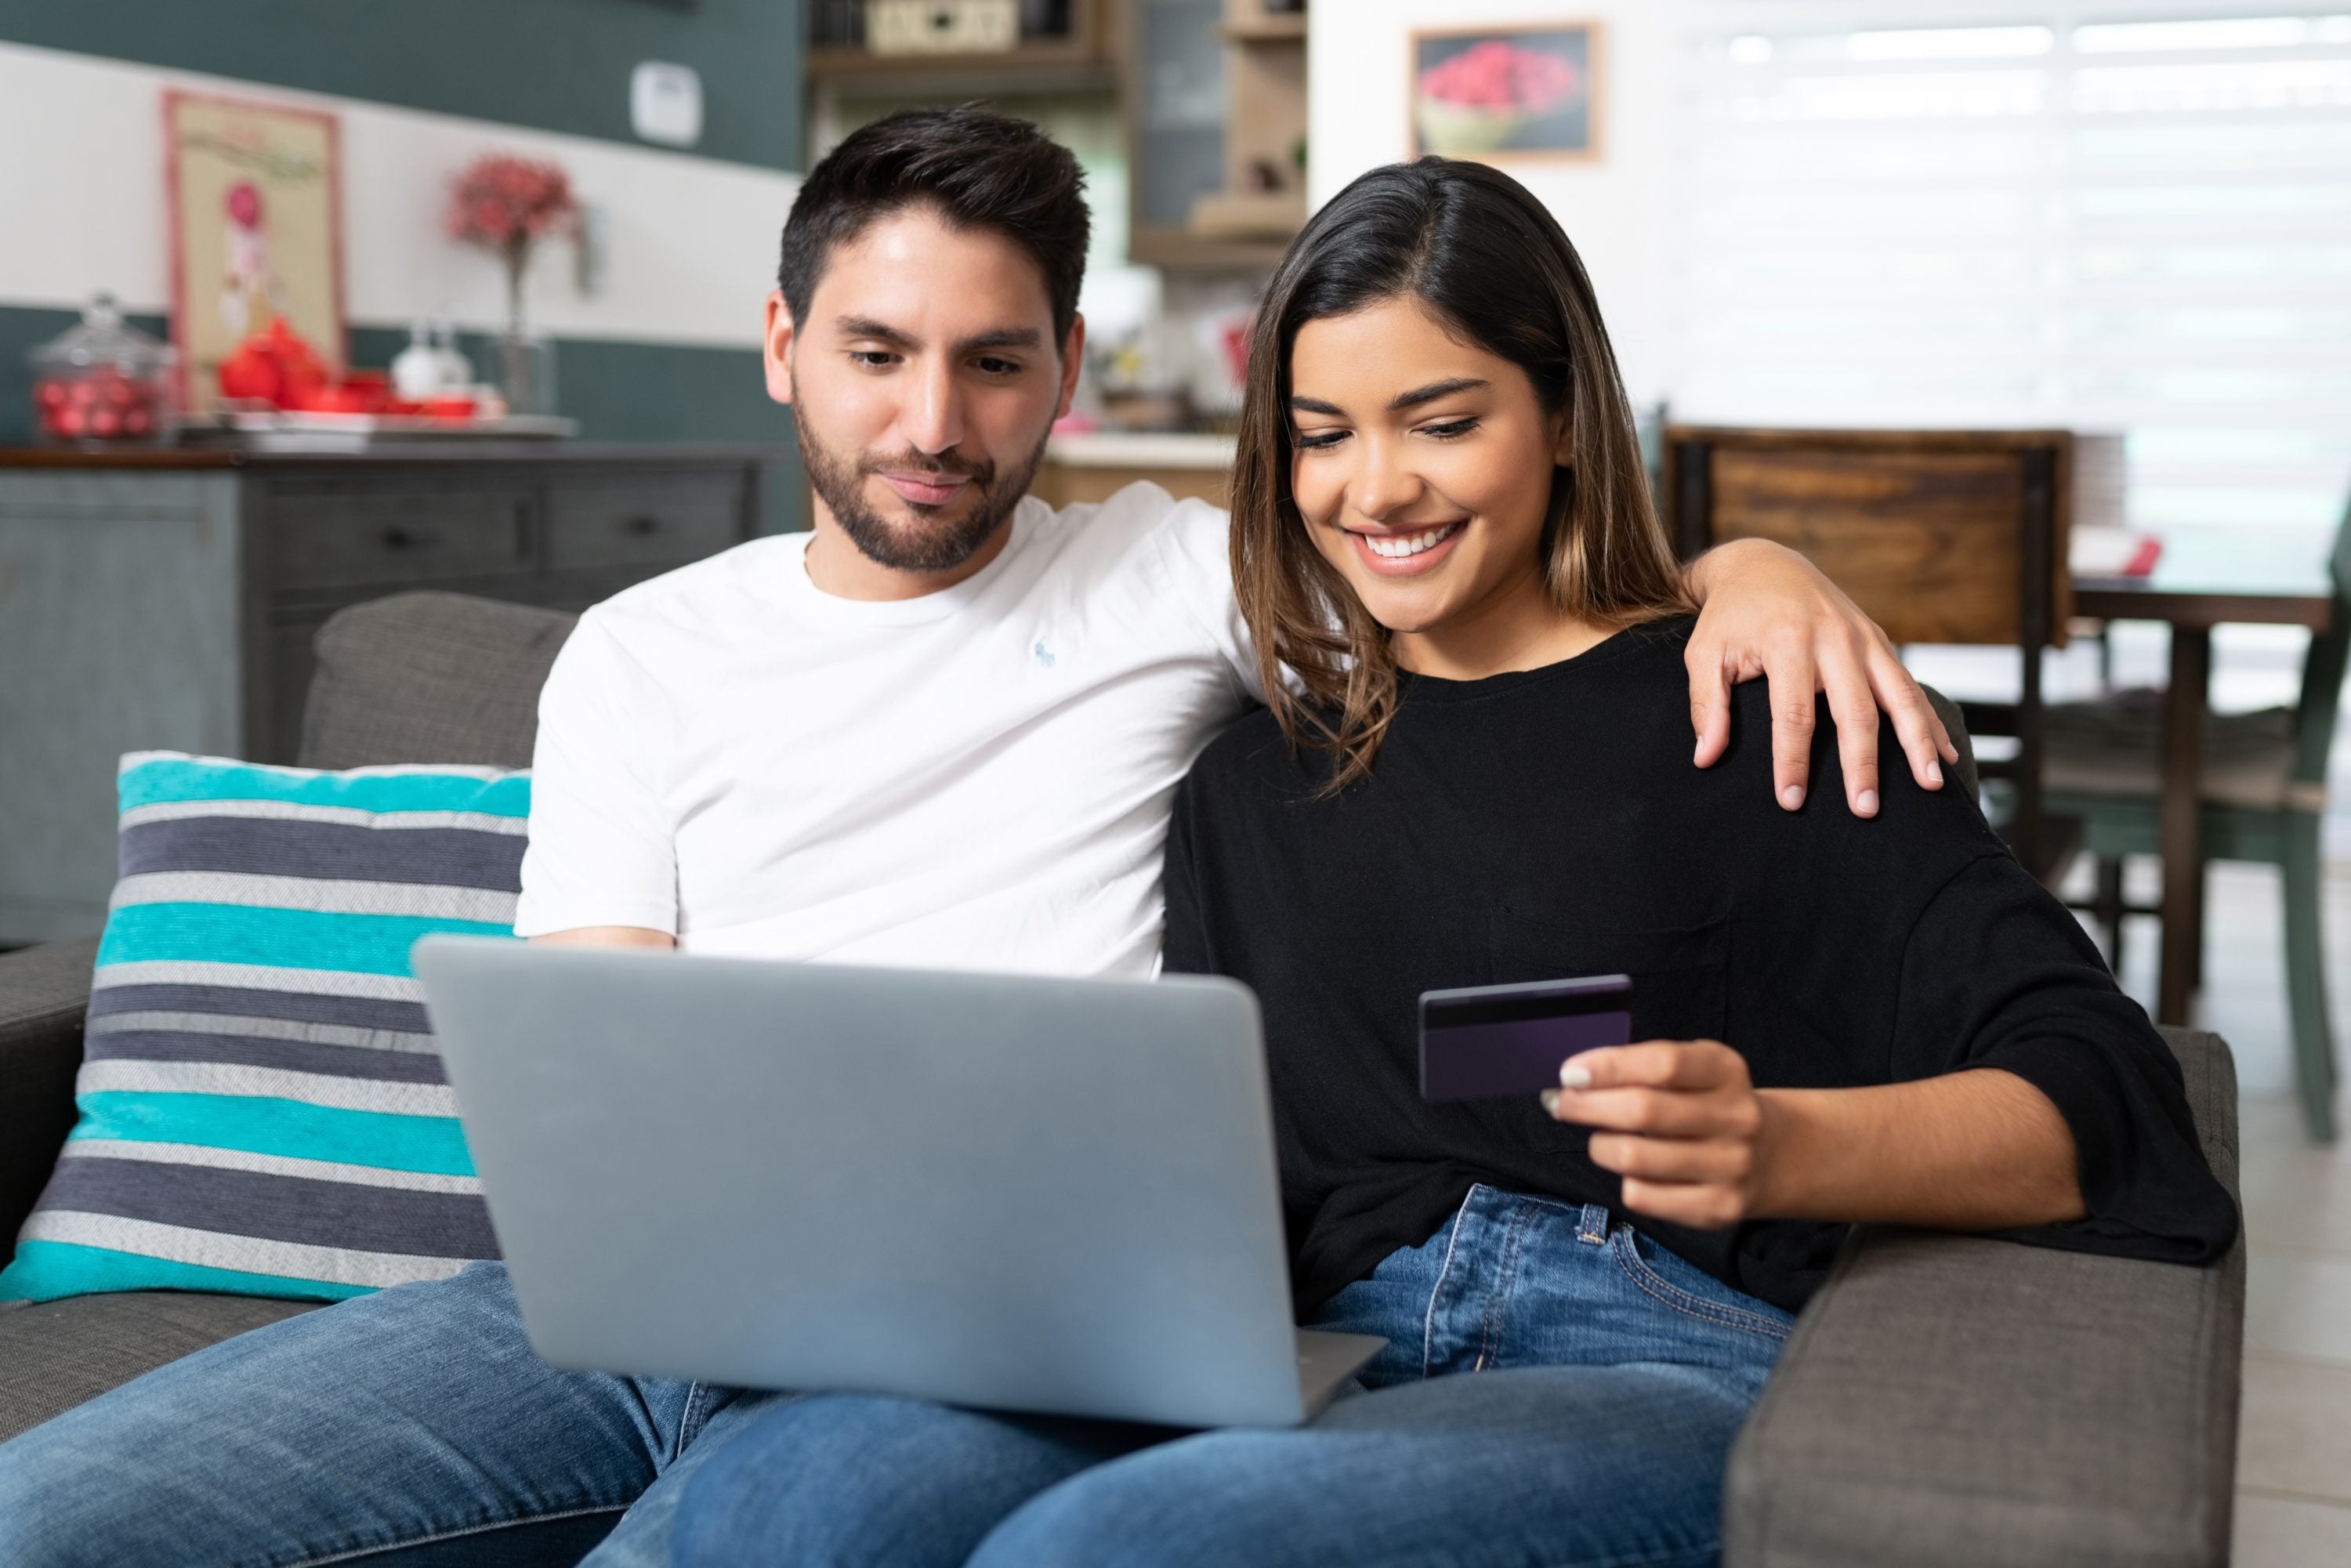 Happy couple shopping online through laptop while sitting on sofa in living room at home